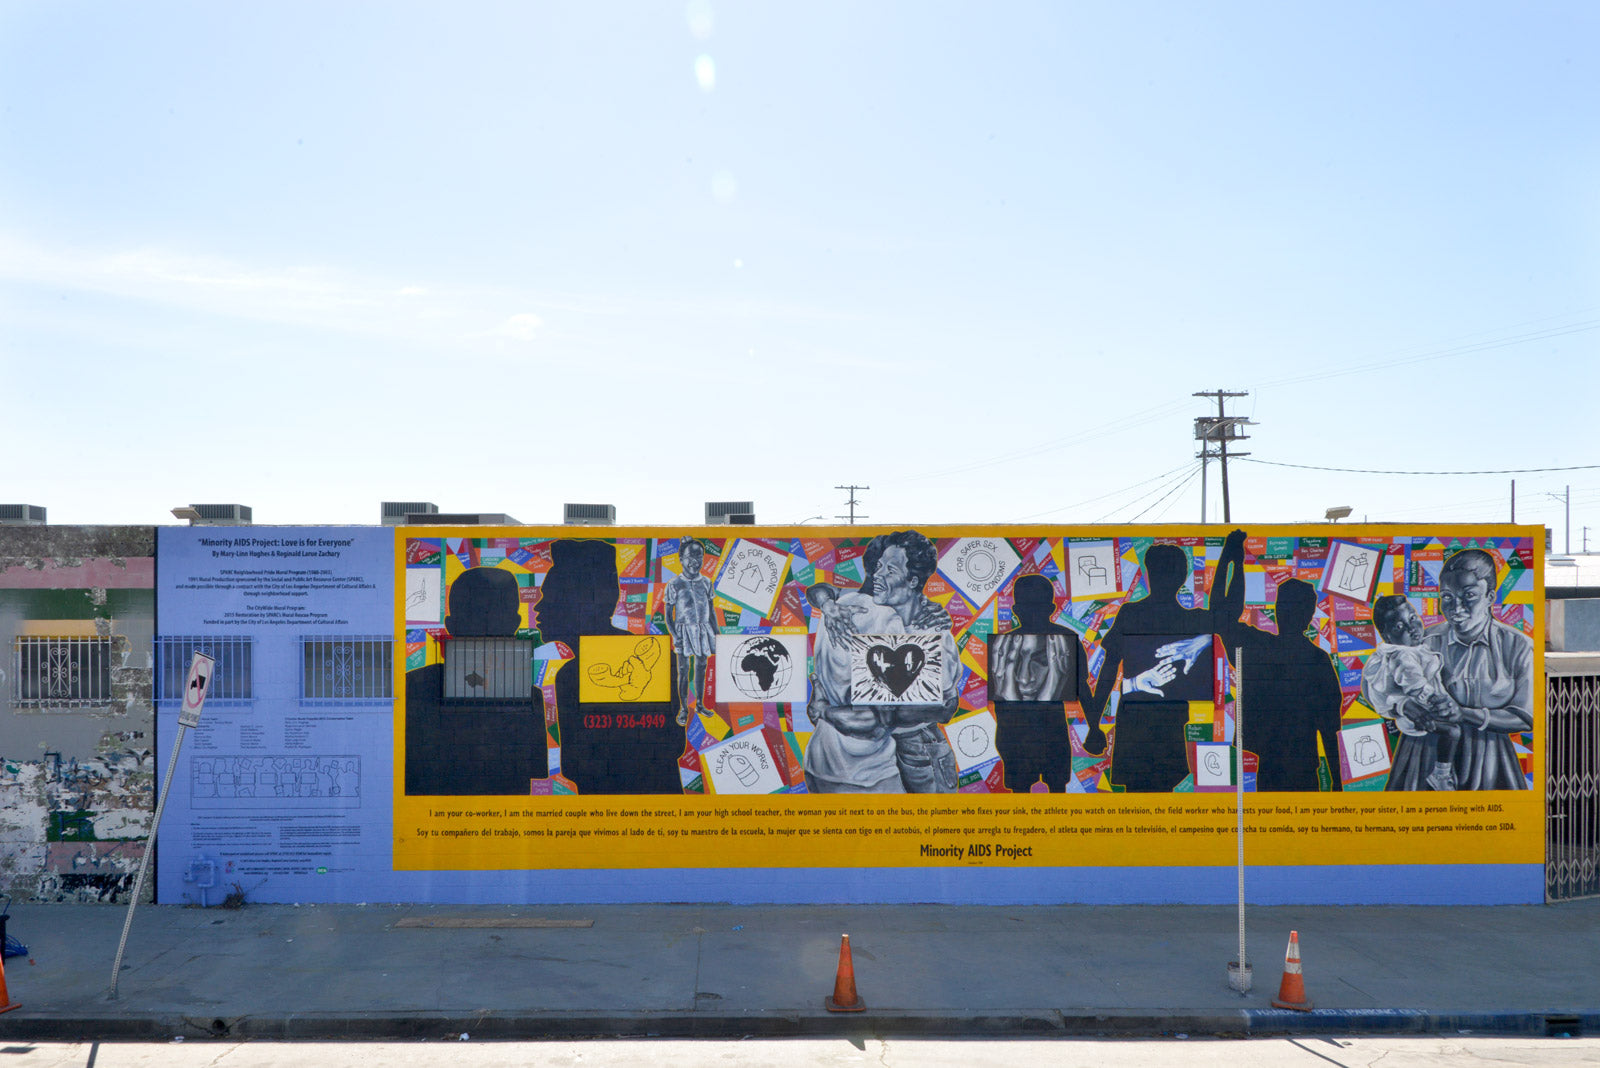 Restoration of "Love is For Everyone" by Mary-Linn Hughes and Reginald Zachary in West Adams, CA